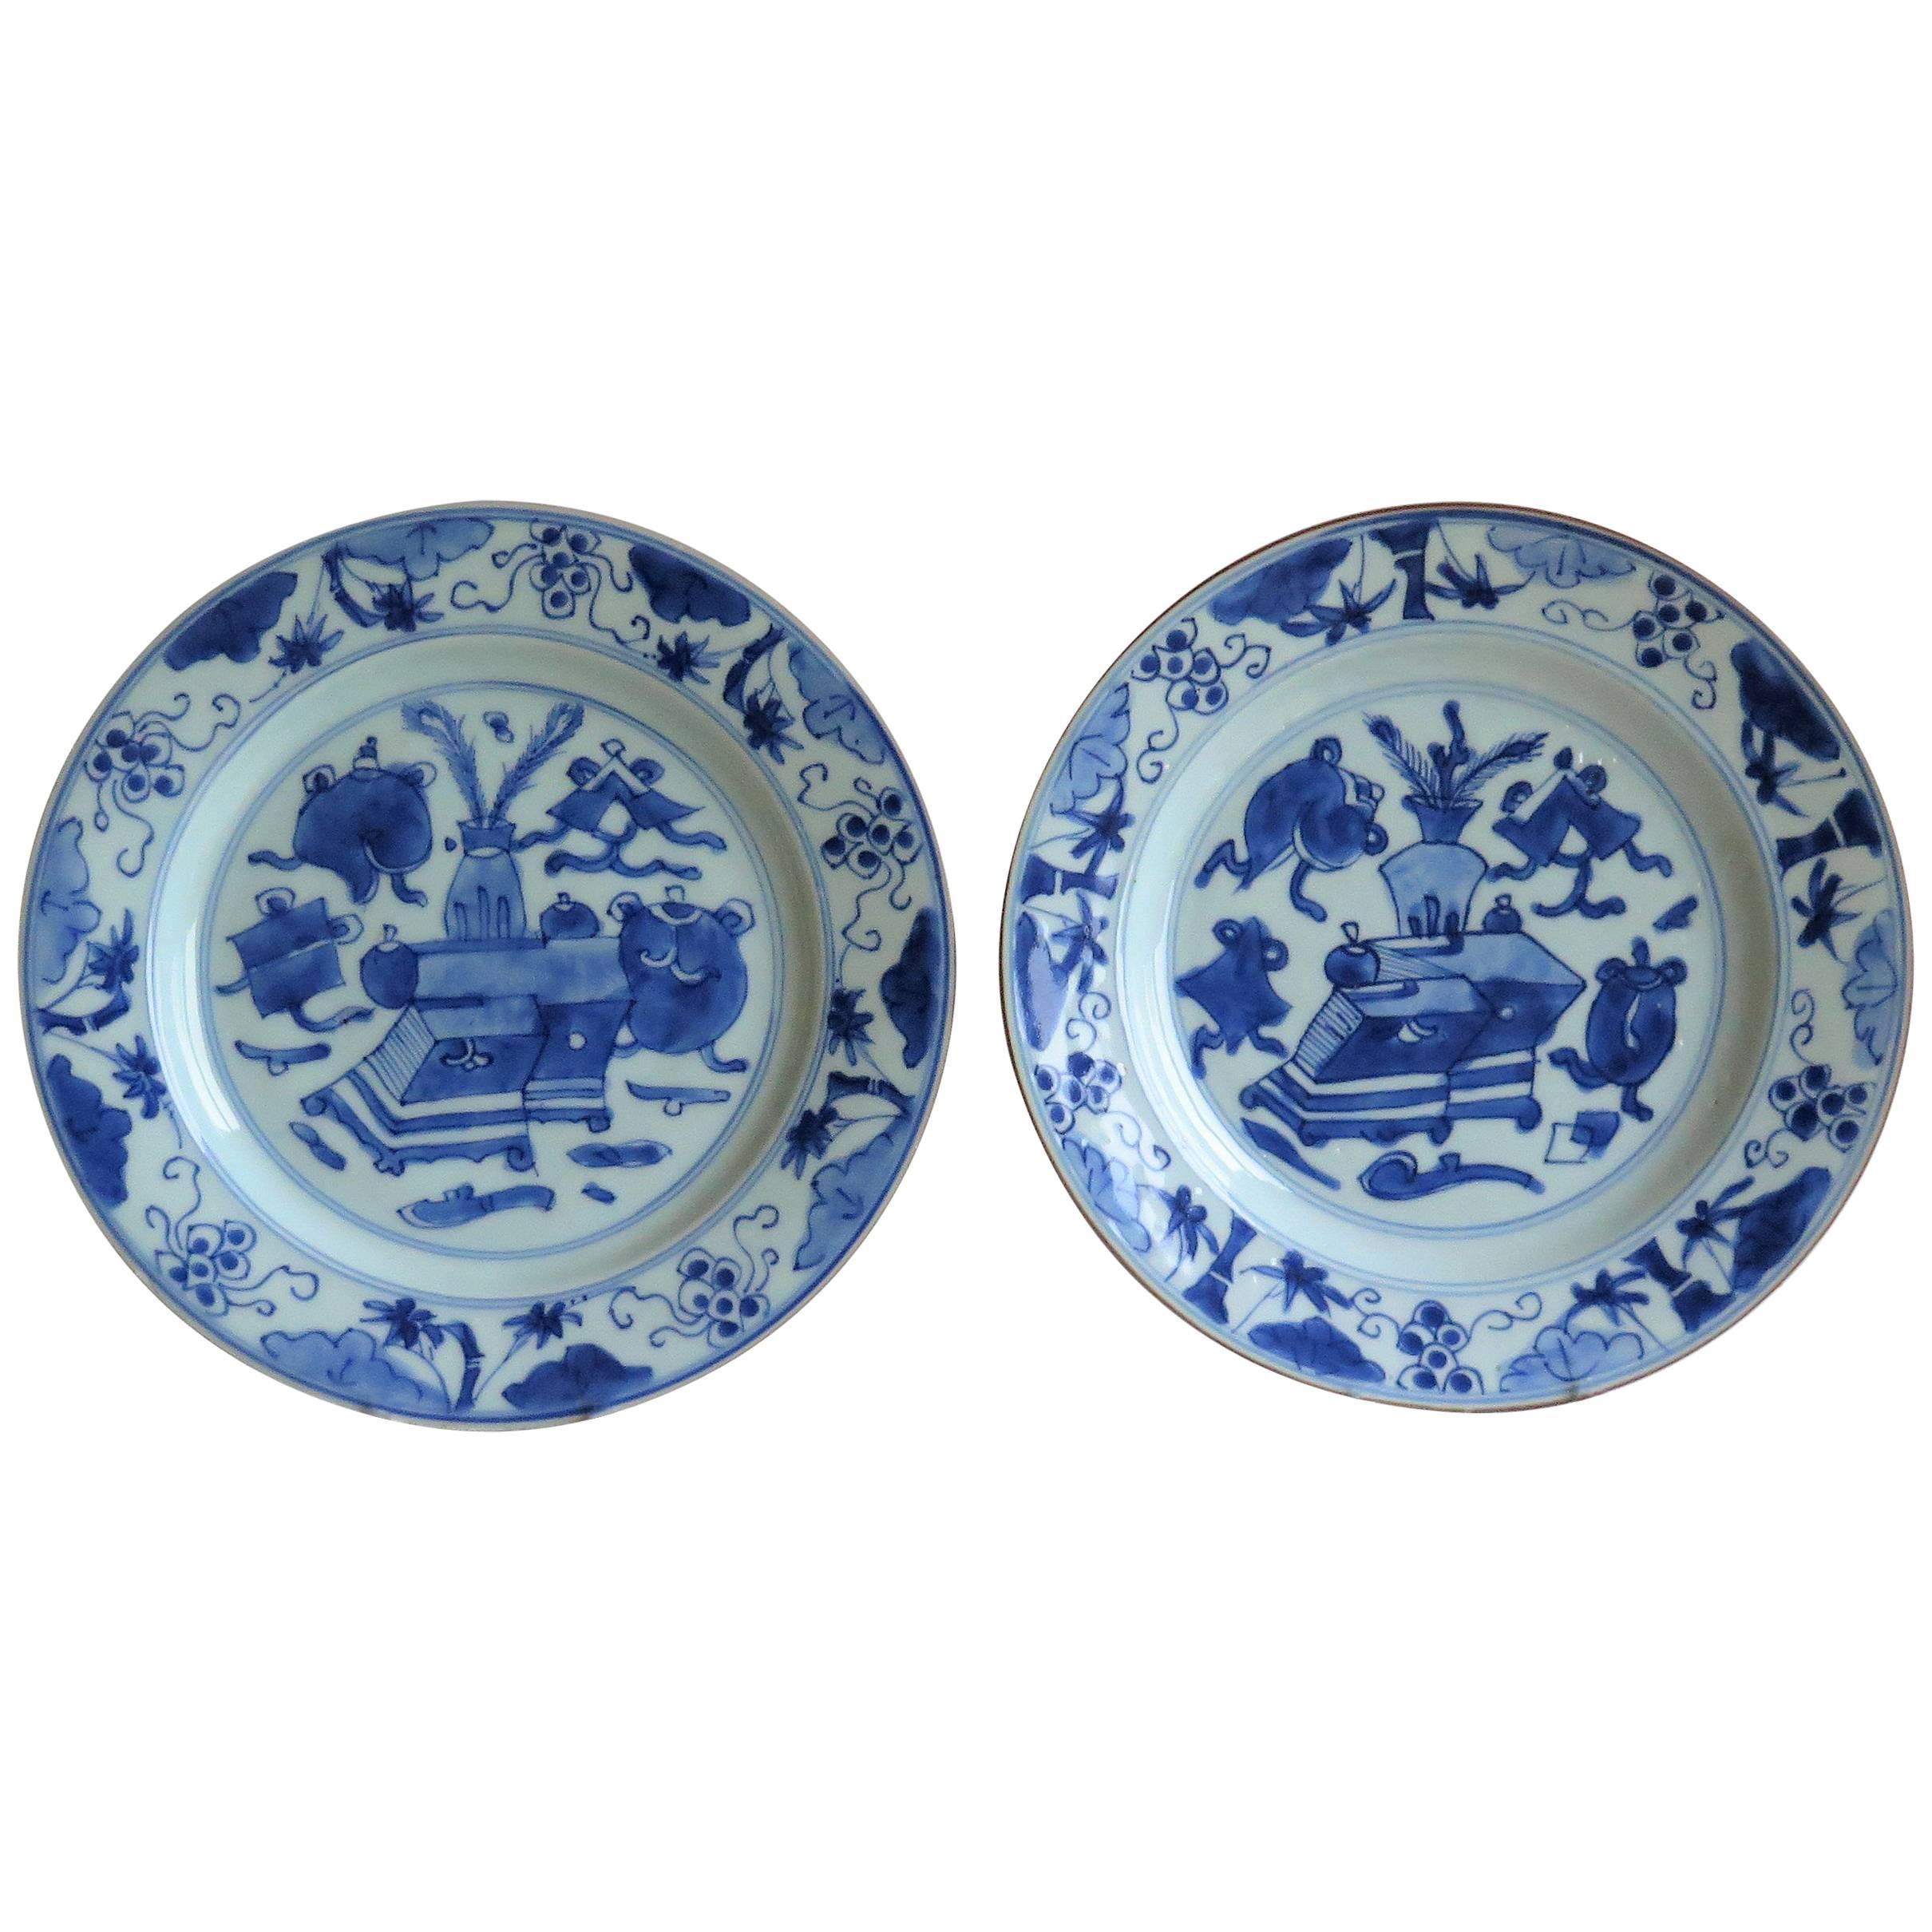 Fine Pair of Chinese Porcelain Plates Blue and White, 18th Century Qing Ca 1735